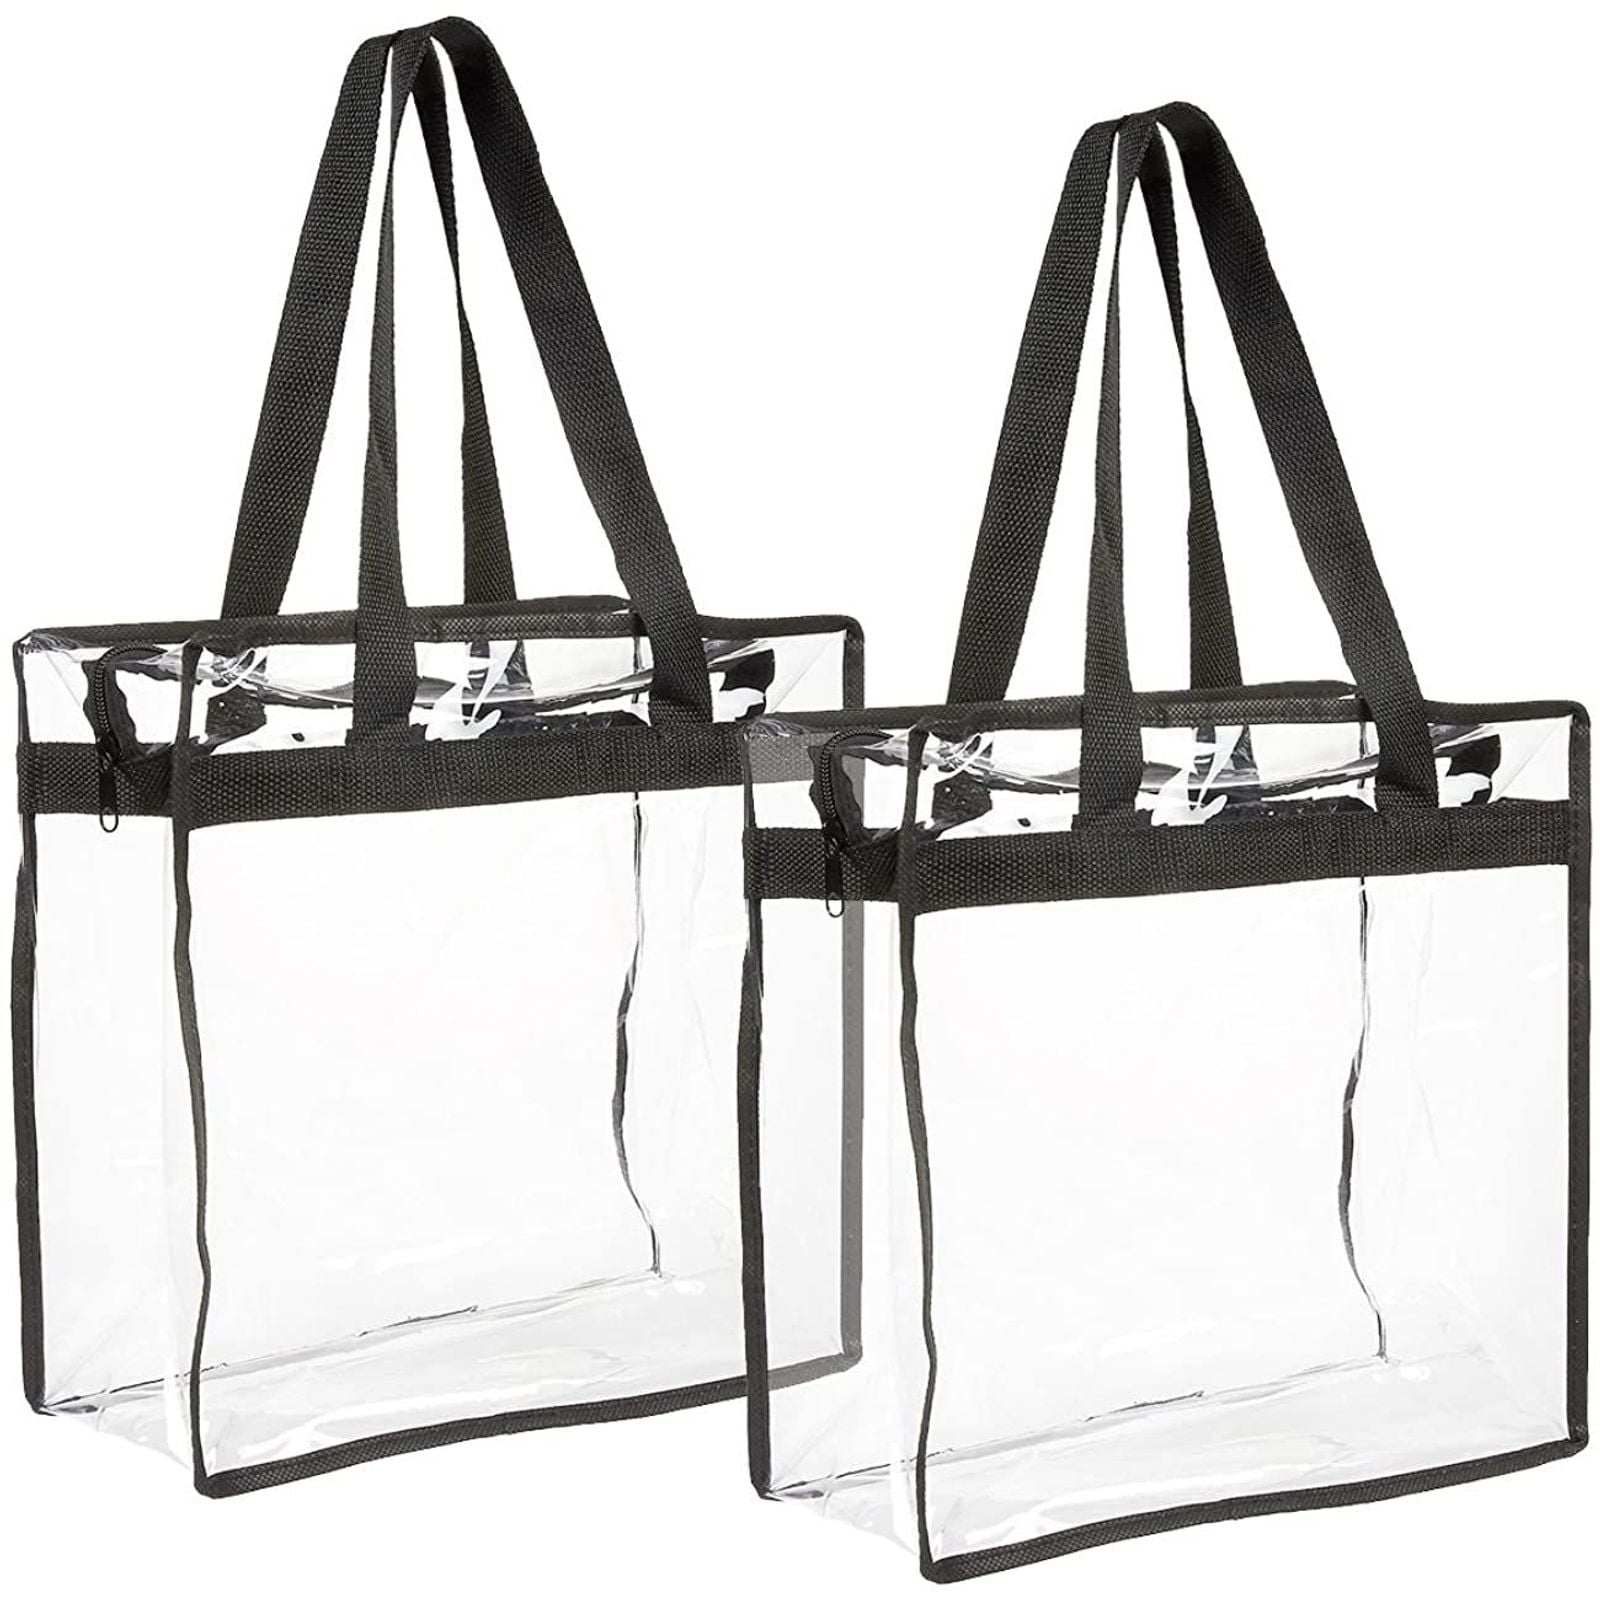 Transparent Tote Bag Stadium Security Travel and Gym Clear Bag See Through W8L6 